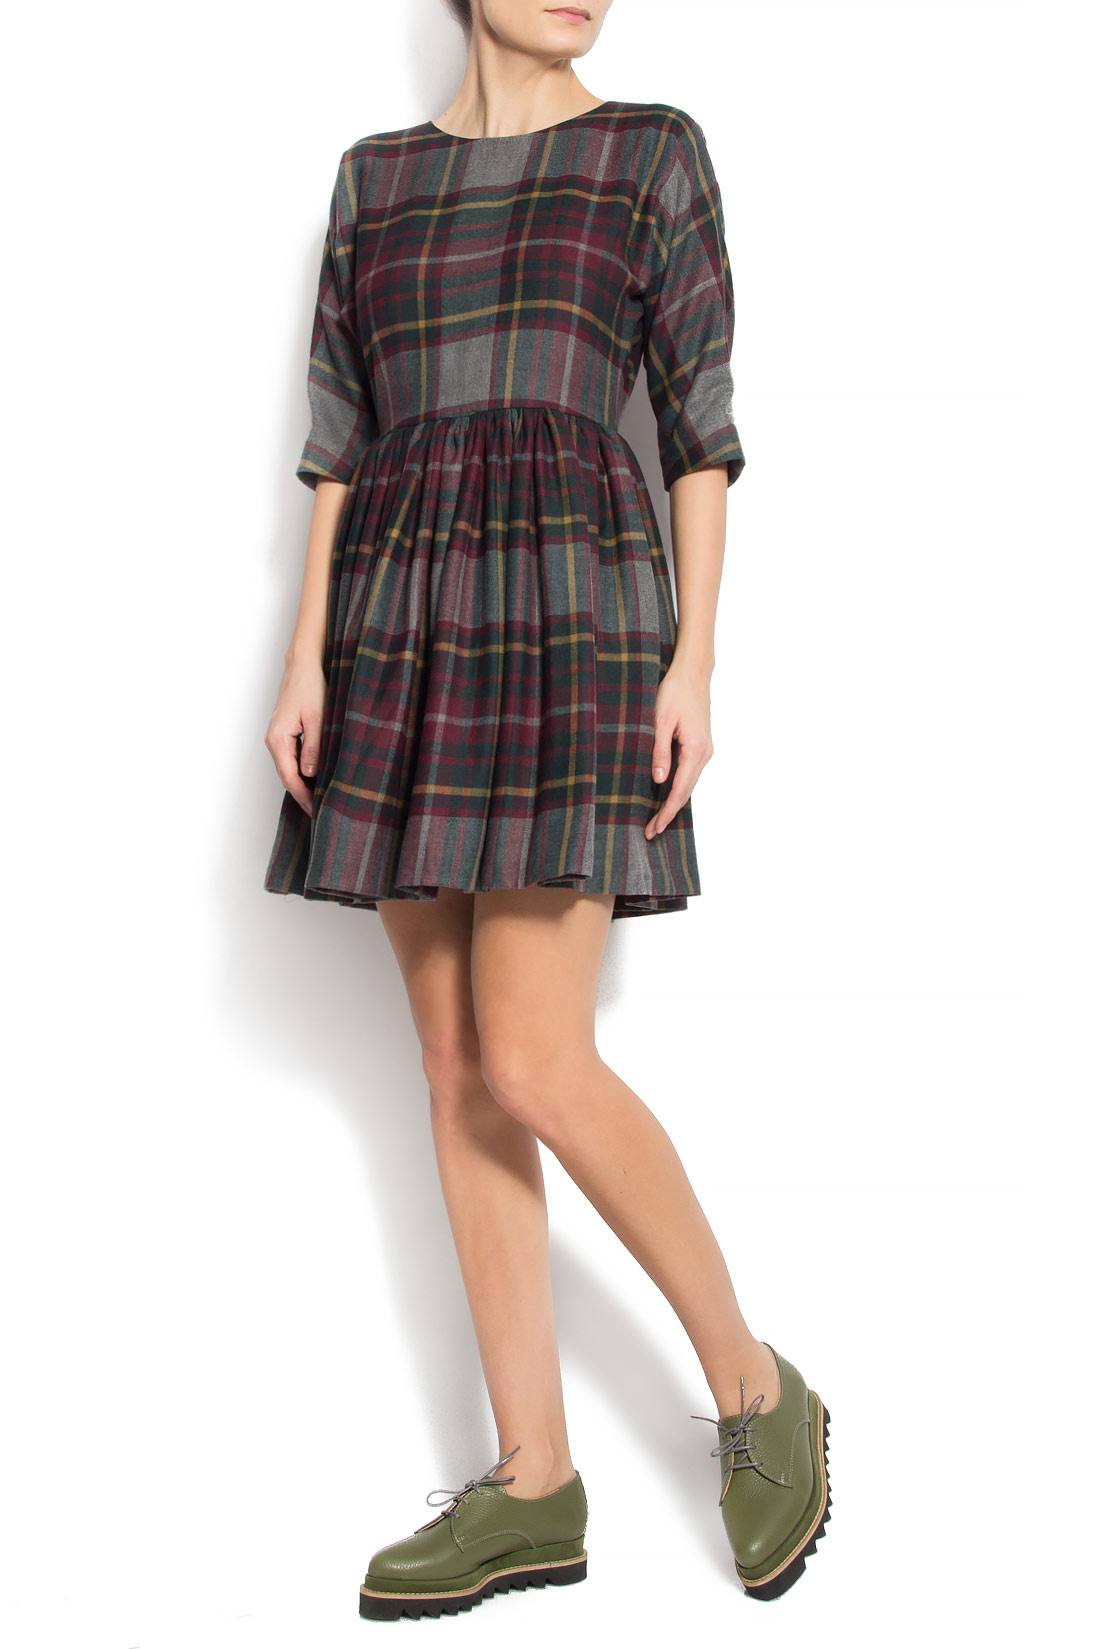 Checked wool mini dress Claudia Castrase image 0